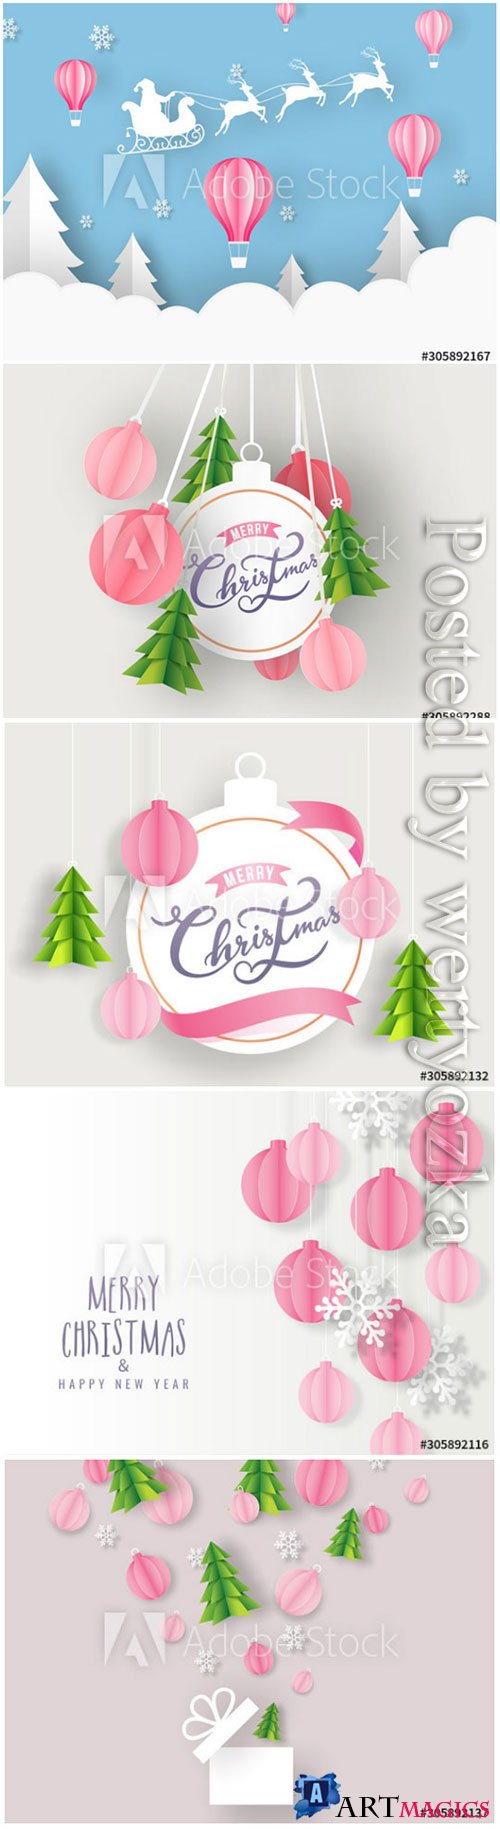 Merry Christmas decorated with paper in vector